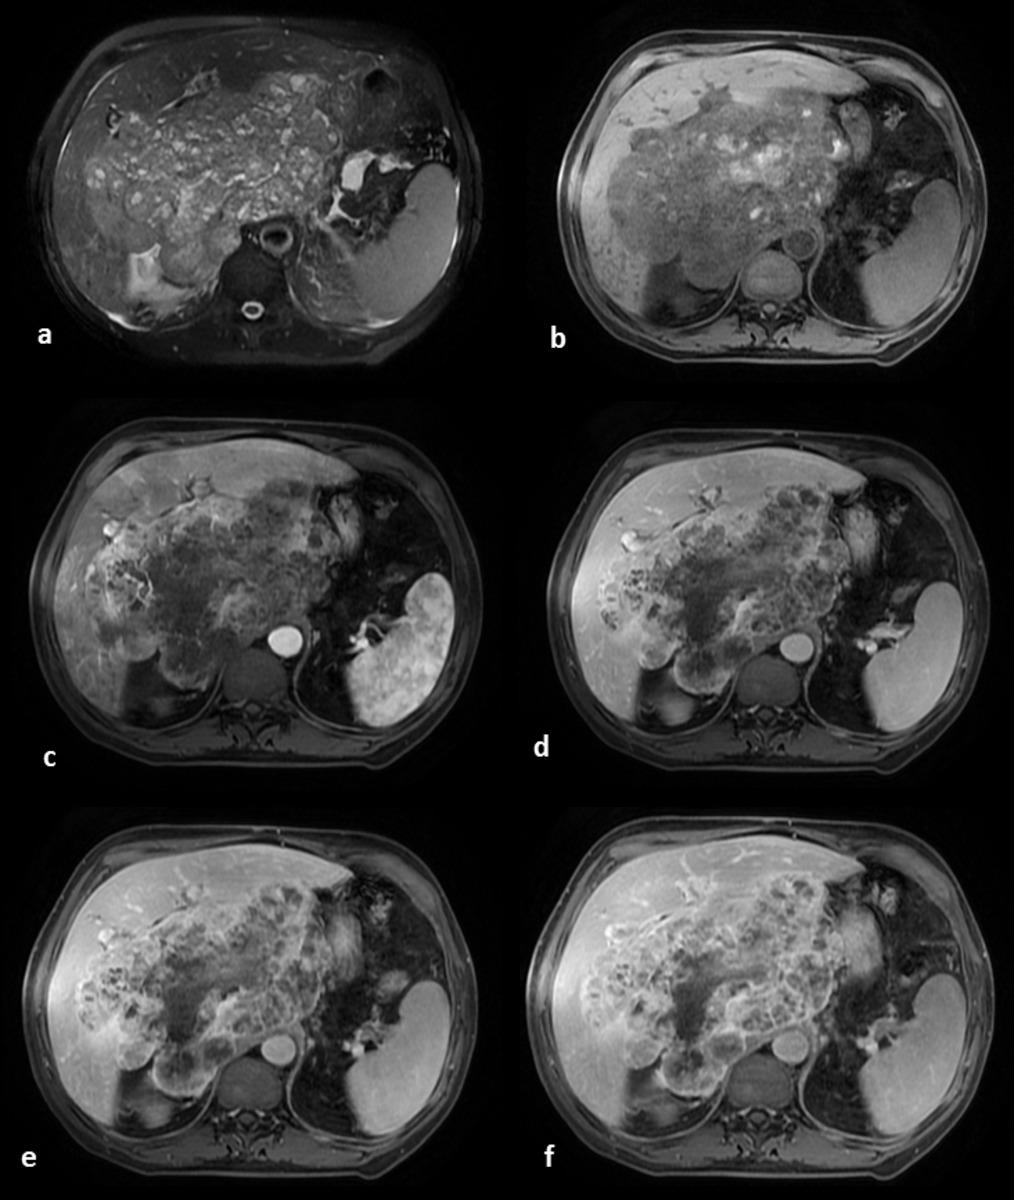 Fig. 11: Hepatic angiosarcoma: the tumor is heterogeneous on fat-suppressed T2weighted images with high signal intensity areas of hemorrhage/necrosis and low intensity areas of hemosiderin